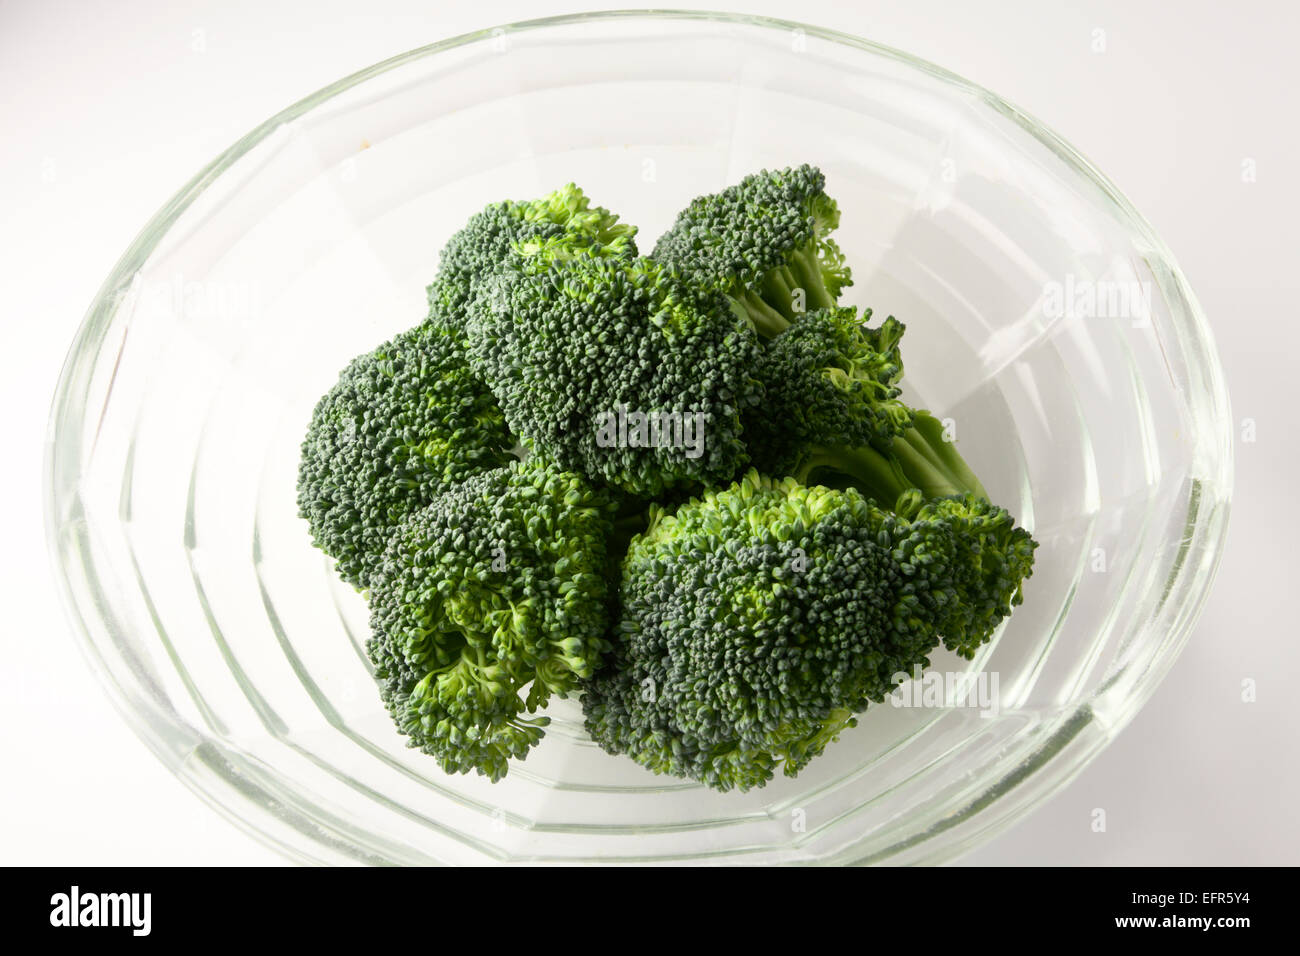 Broccoli Florets in a Glass Bowl Stock Photo